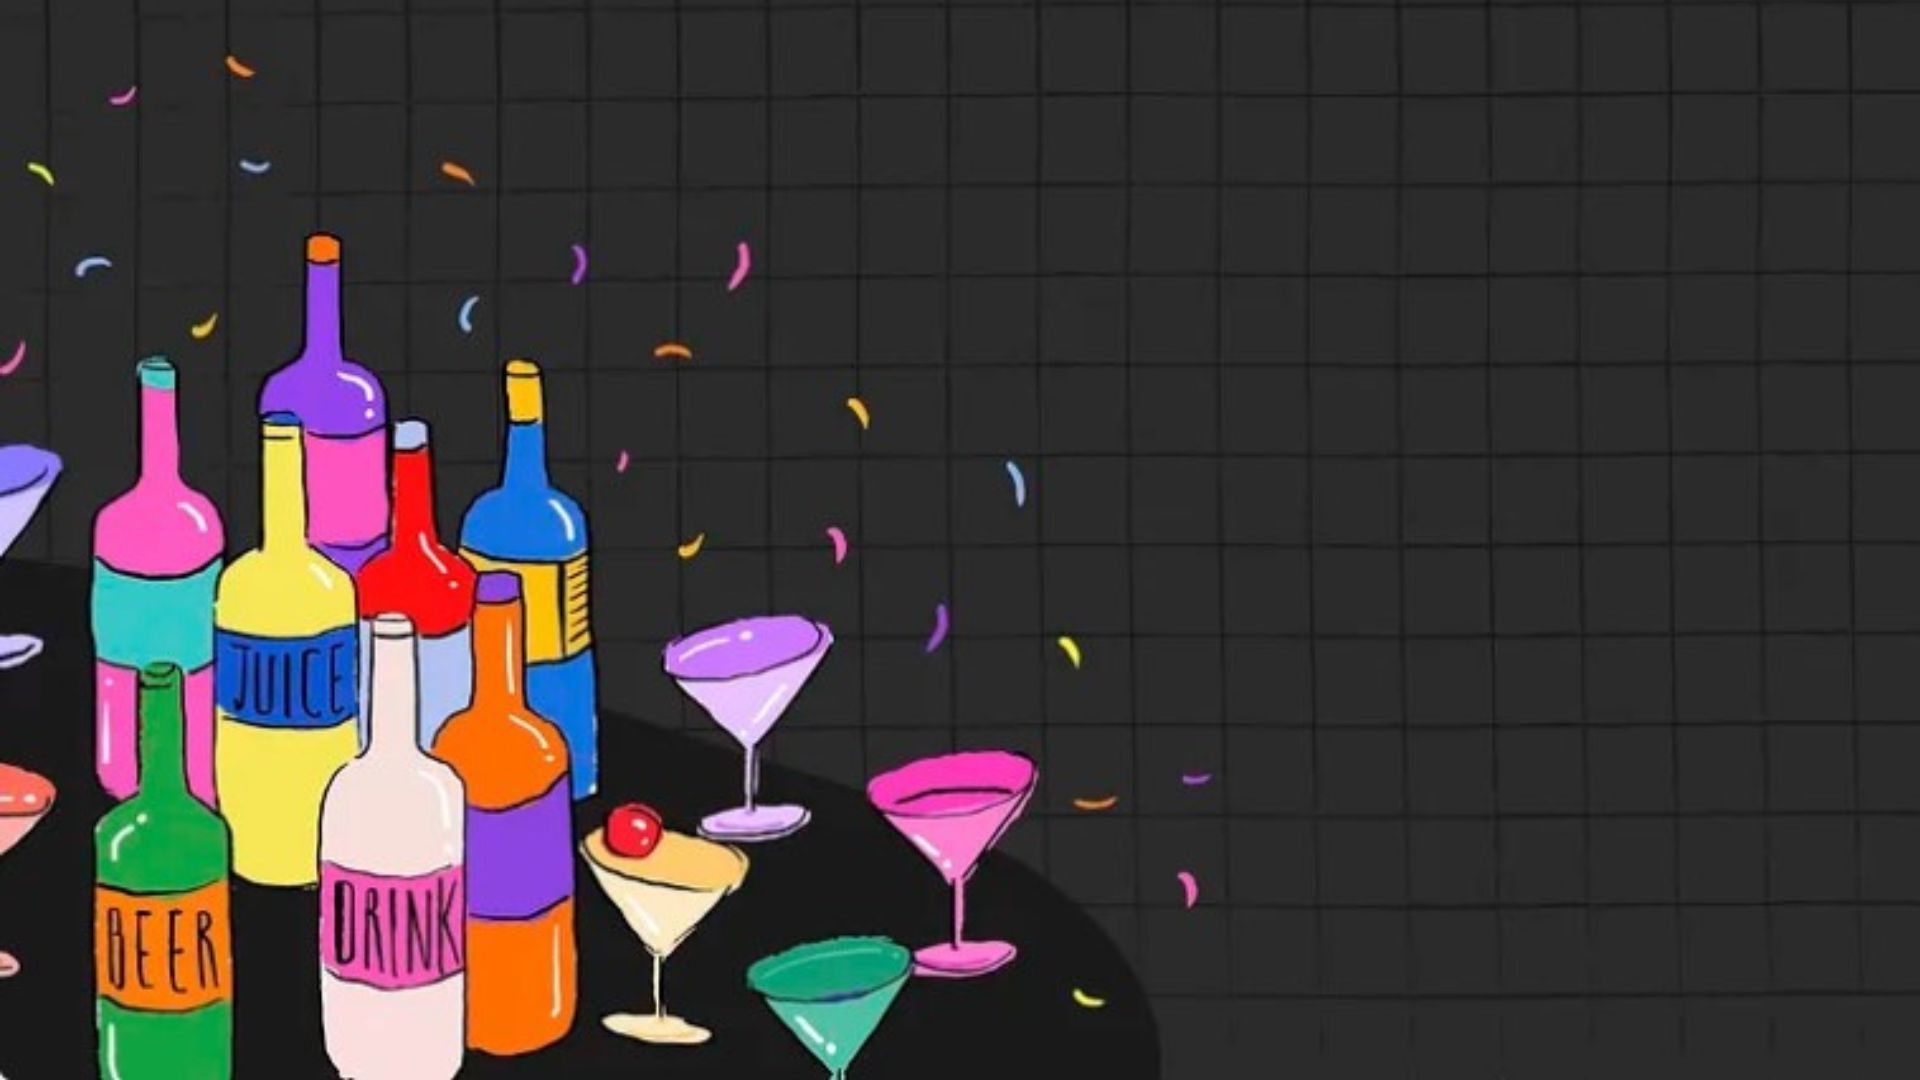 An illustration of bottles and glasses with confetti -nonprofit humour